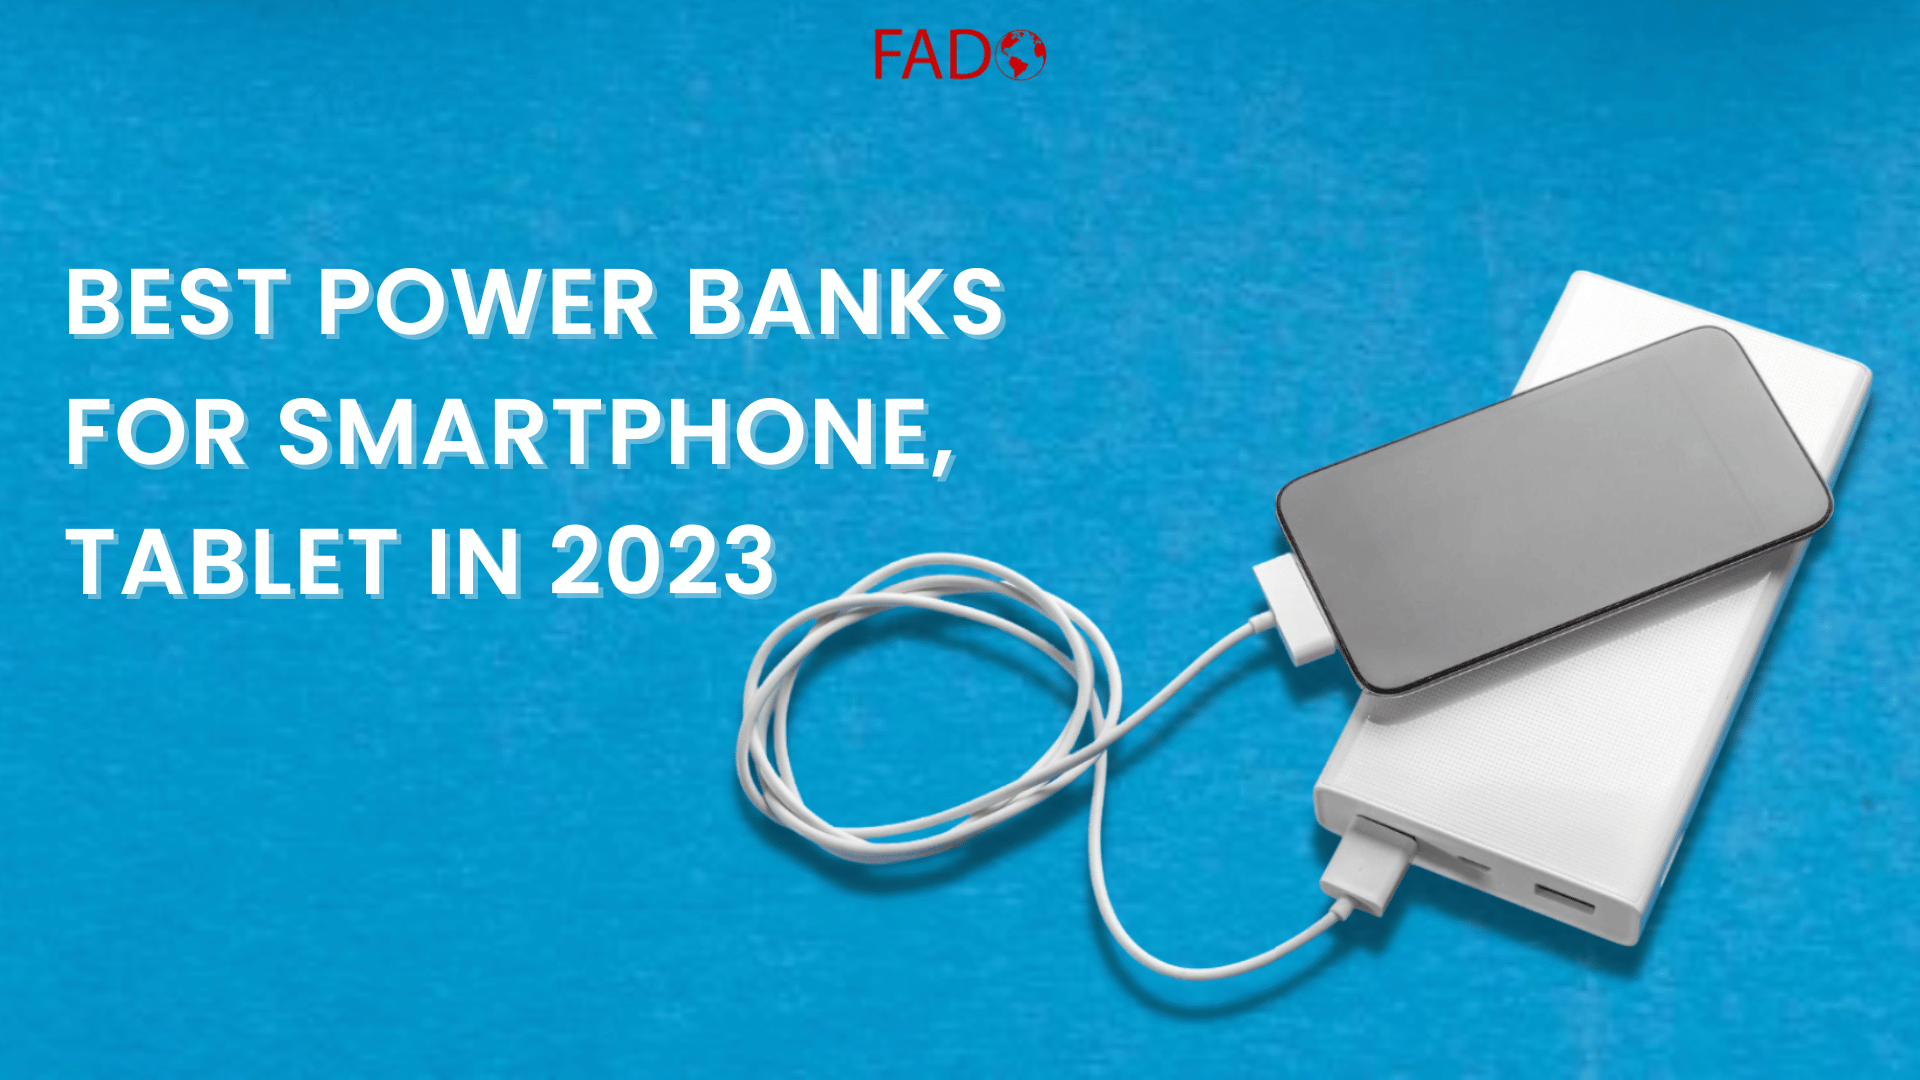 Best Power Banks for Smartphone, Tablet in 2023